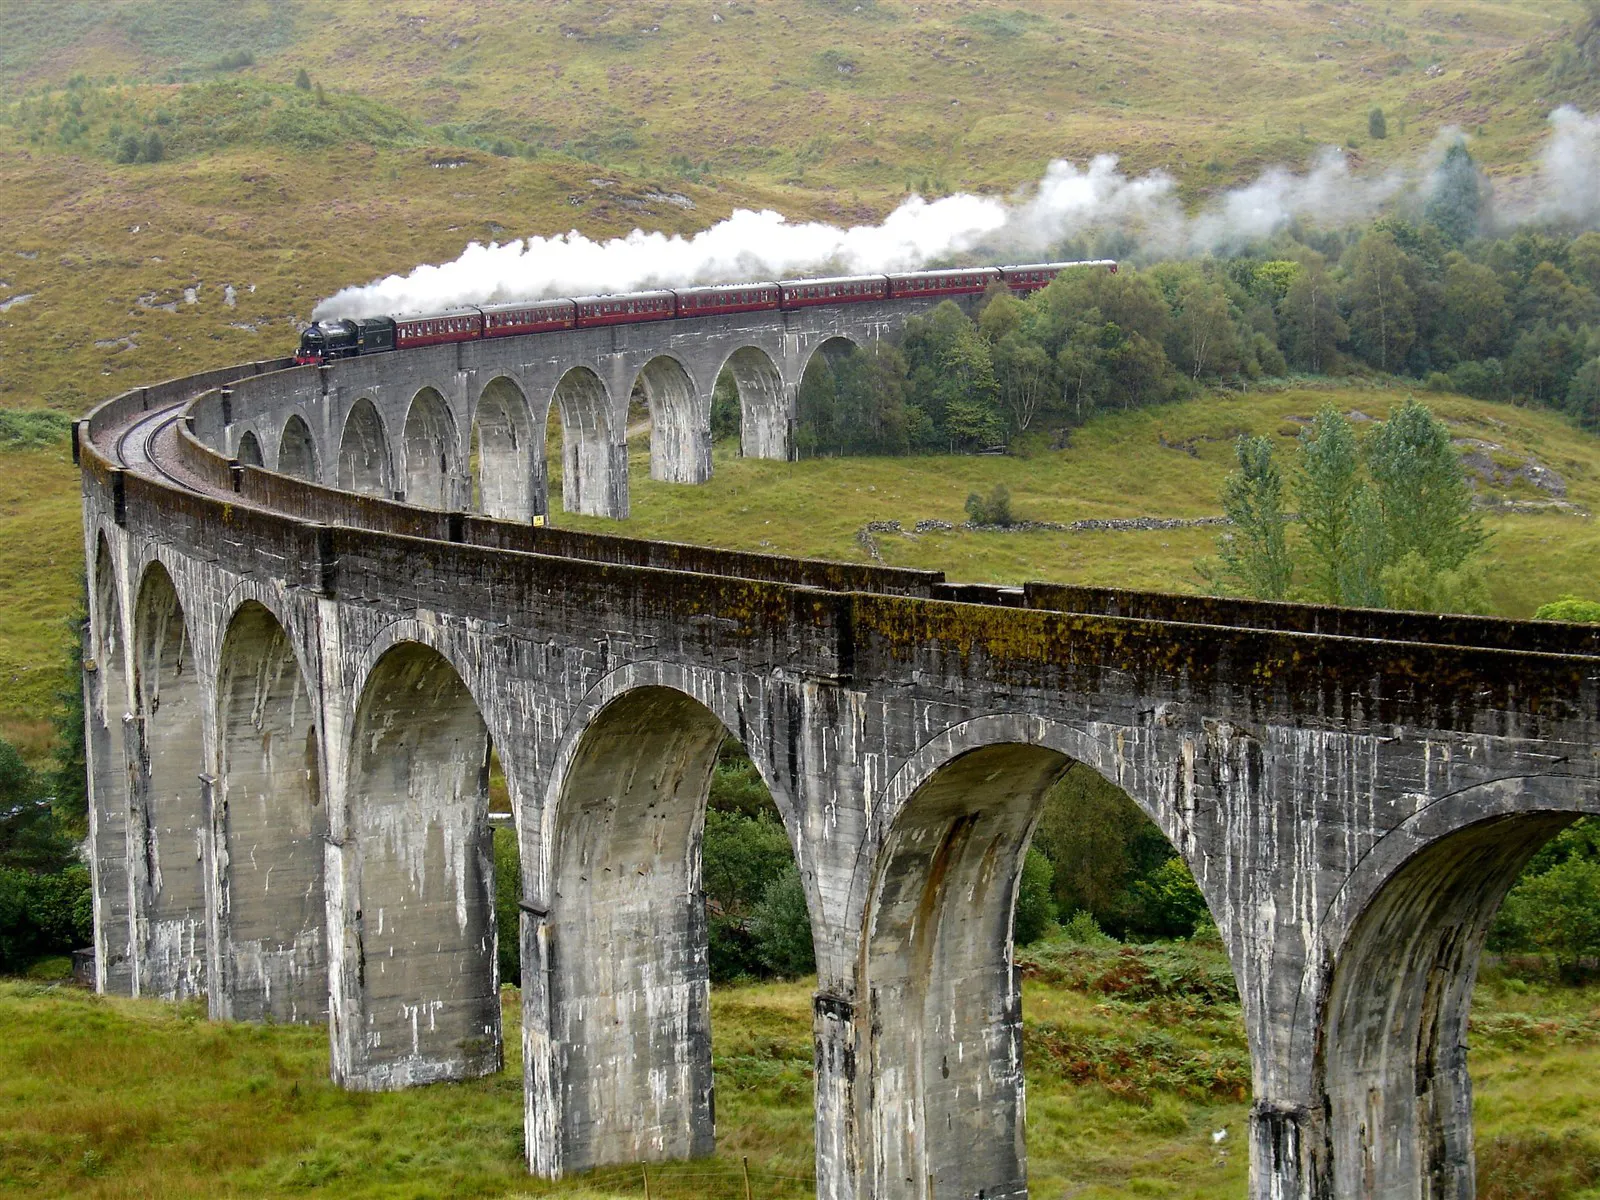 TheJacobite steam train passing over Glenfinnan Viaduct